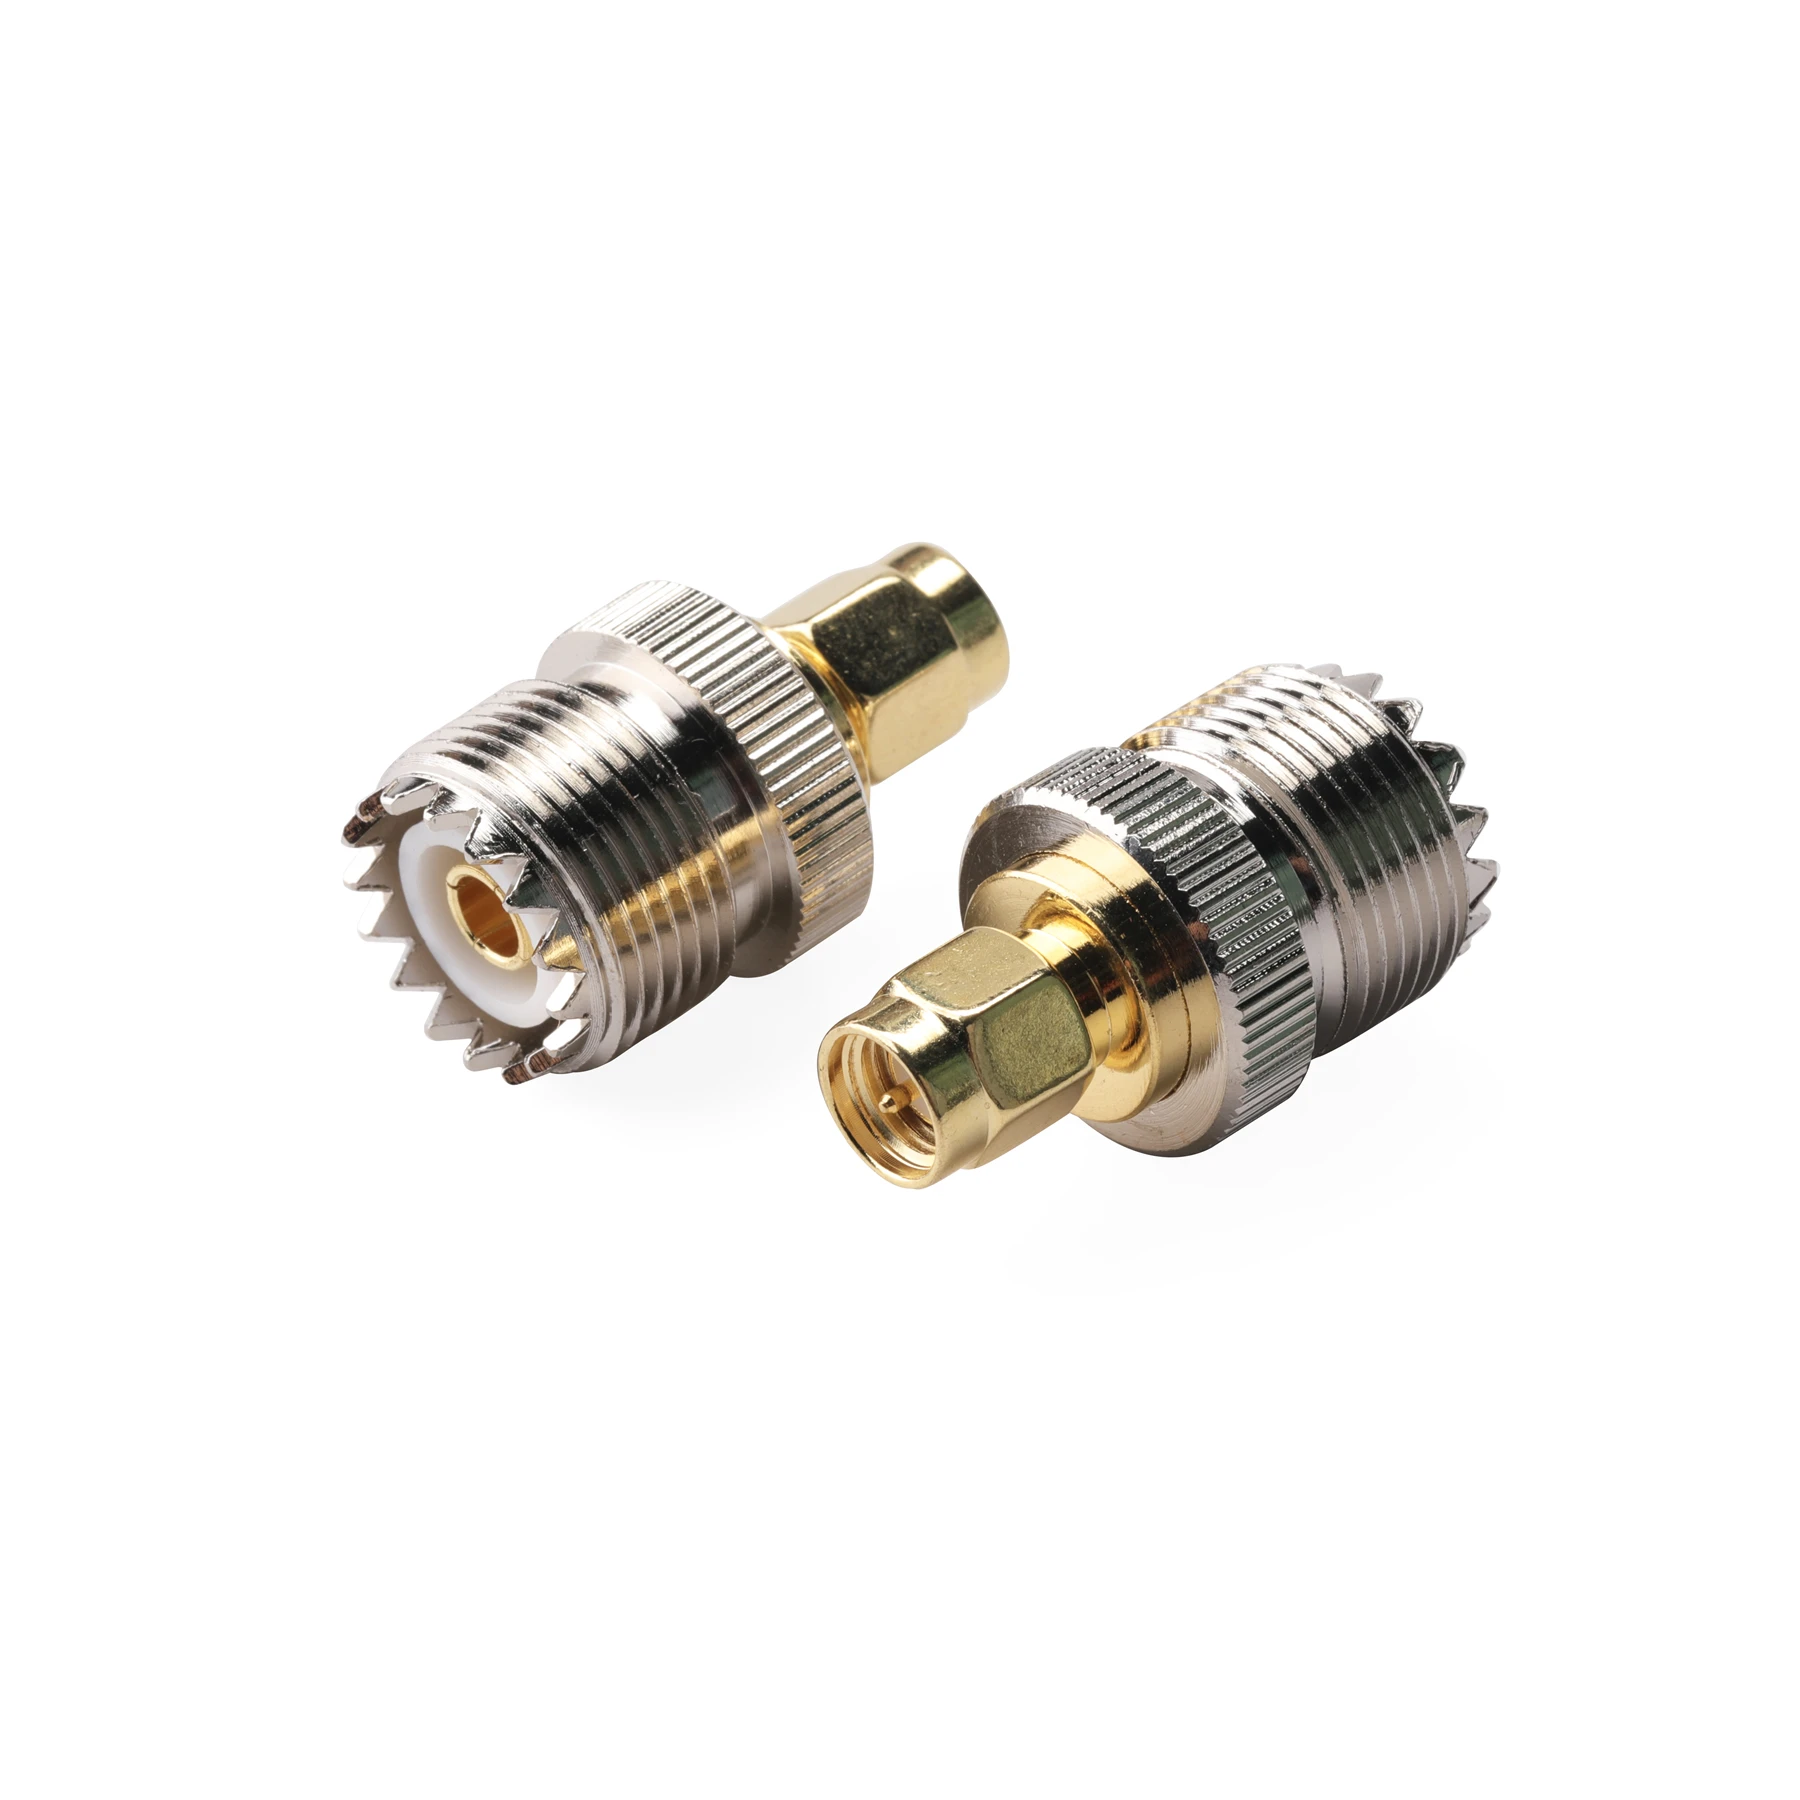 

2pcs RF coaxial coax adapter SMA male to UHF(PL259) female SO-239 SO239 SMA Jack/Plug to UHF Nickel Gold Plated Test Converter